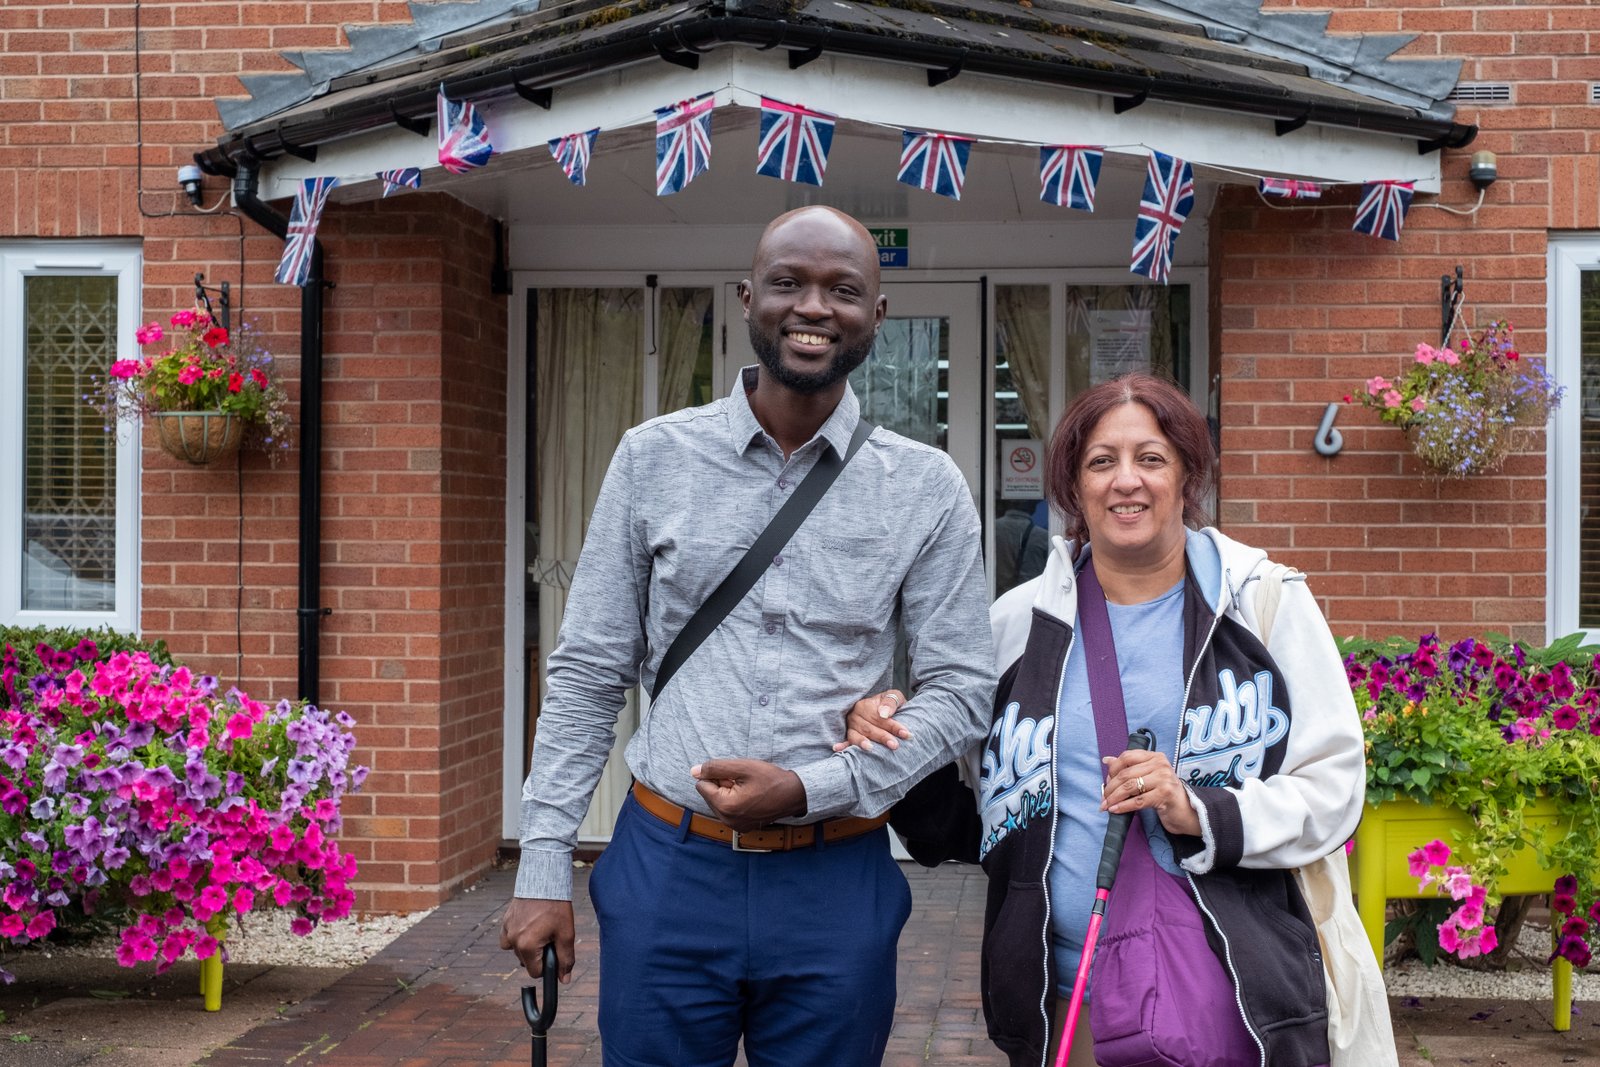 A middle-aged British Asian woman has linked arms with her personal assistant, a young Ghanian man. They are in front of a redbrick building with flower boxes and hanging baskets full of petunias.